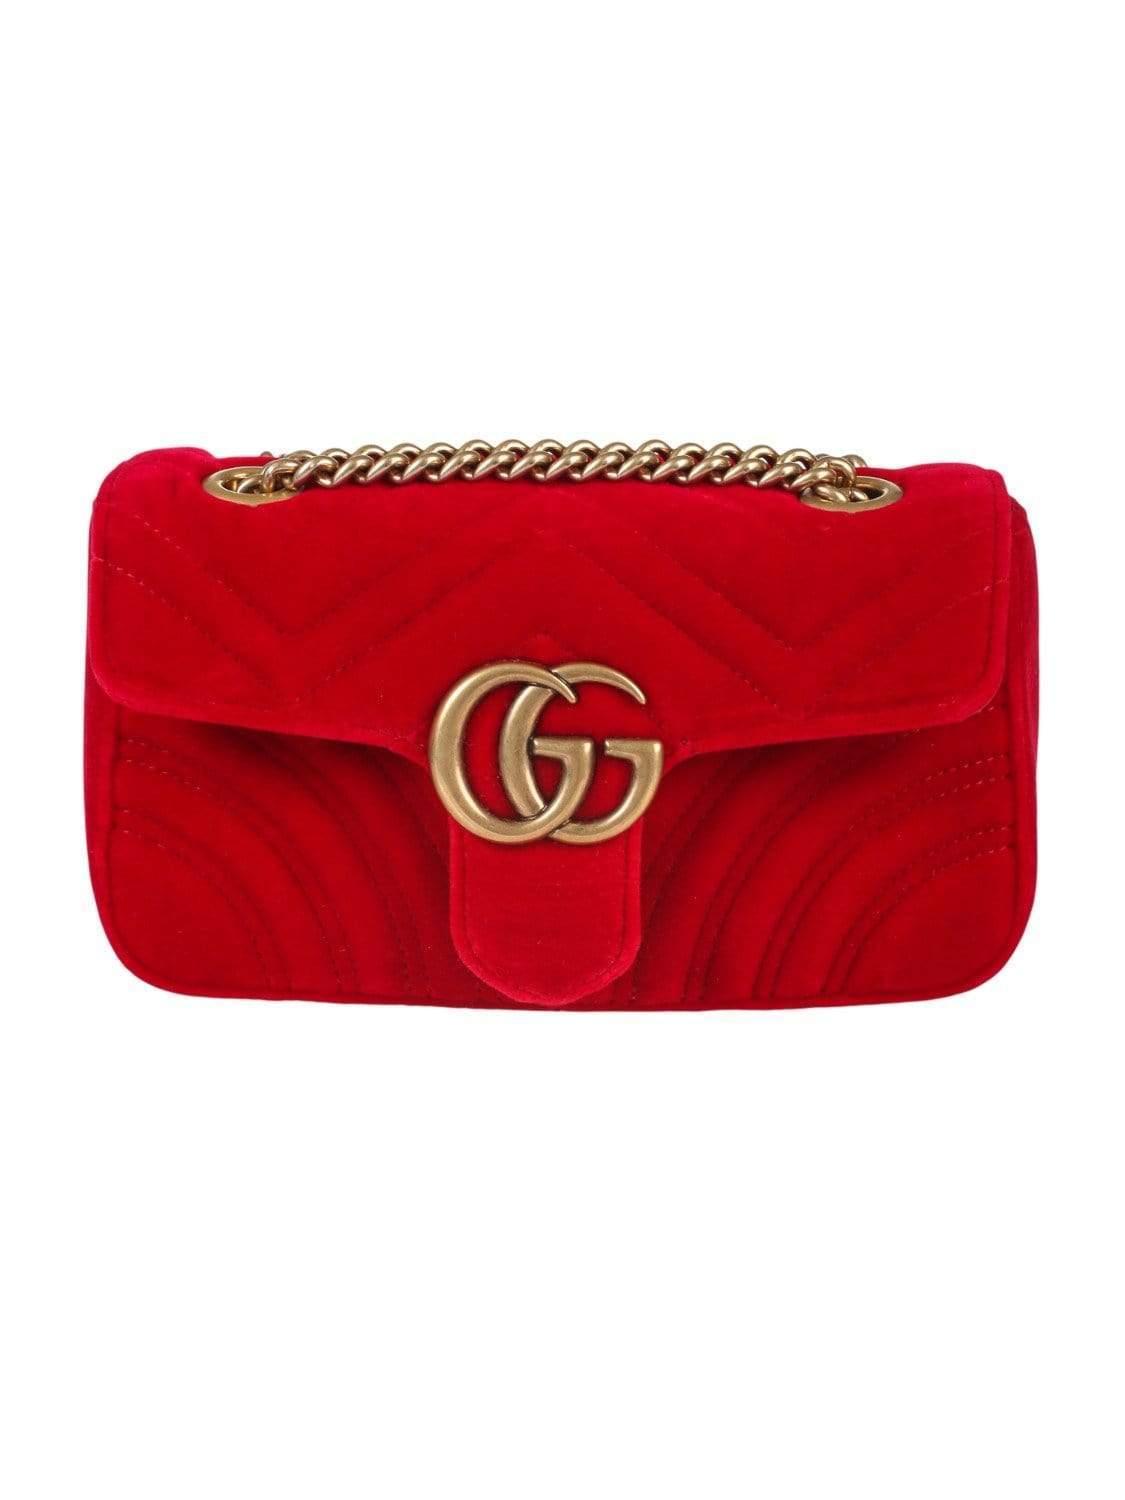 Lyst - Gucci Marmont Mini Gg Bag In Red Velvet With Chevron Pattern And Heart On The Back in Red